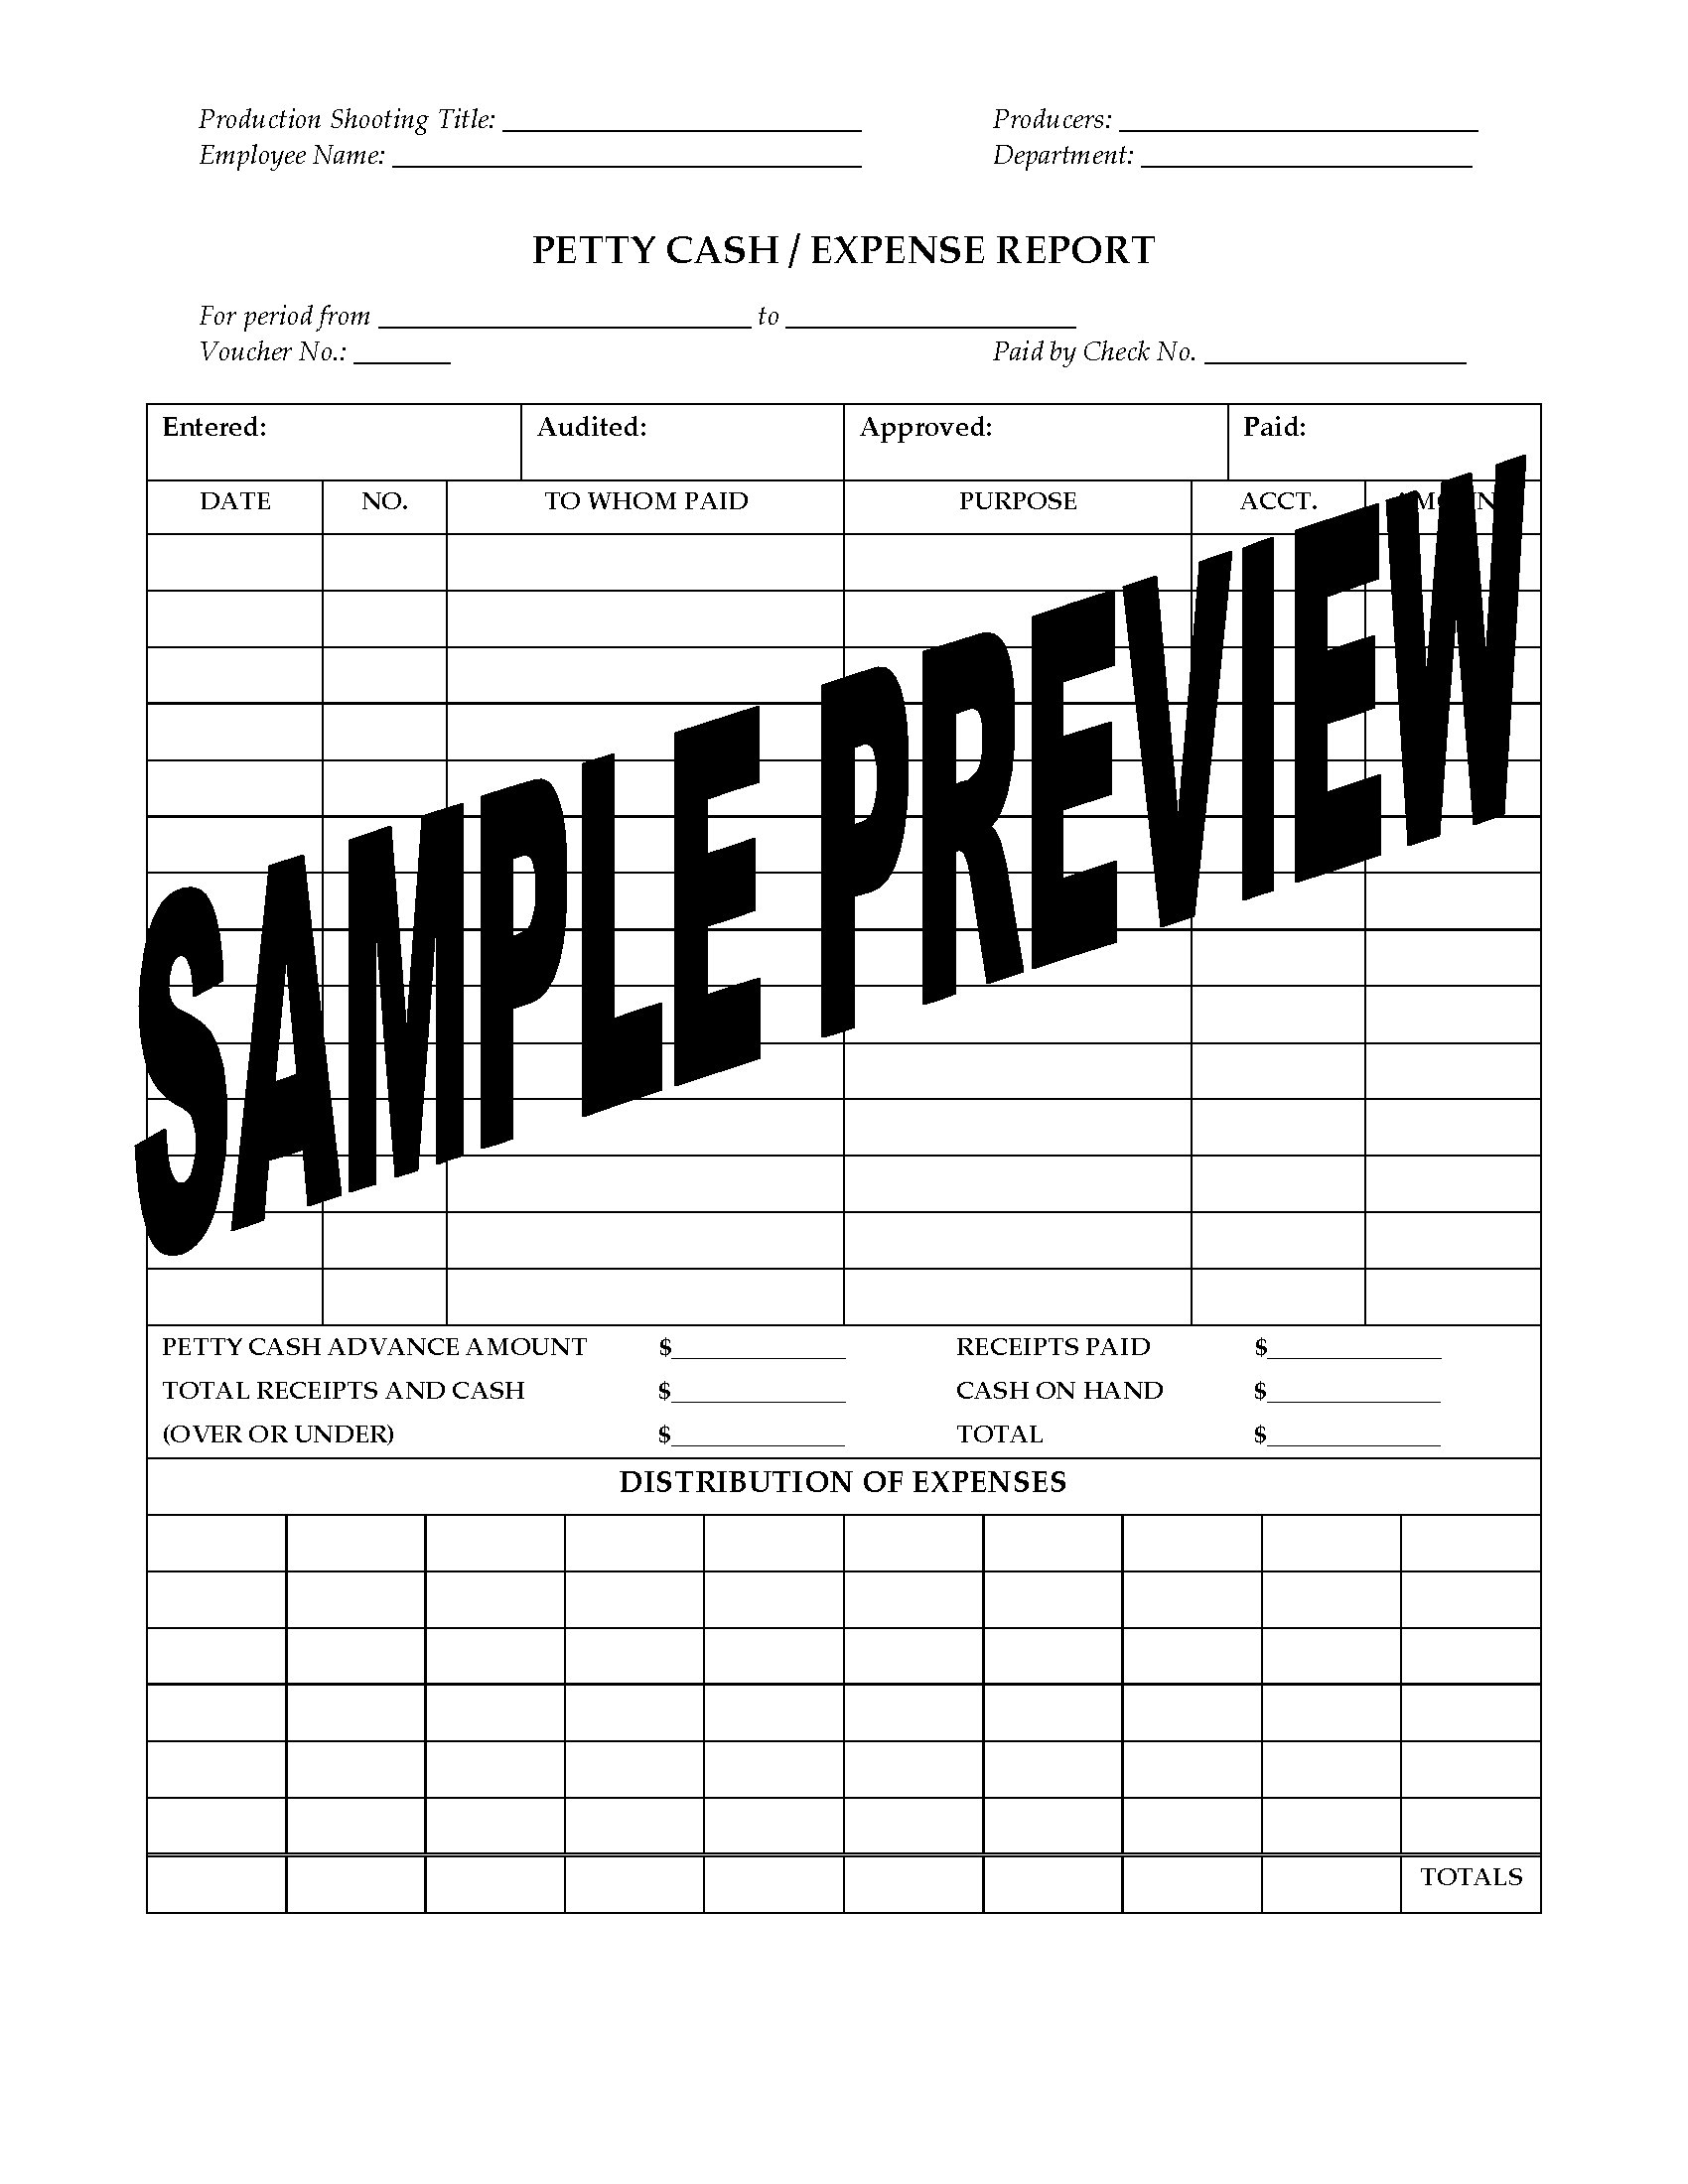 Petty Cash Expense Report for Film or TV Production  Legal Forms In Petty Cash Expense Report Template